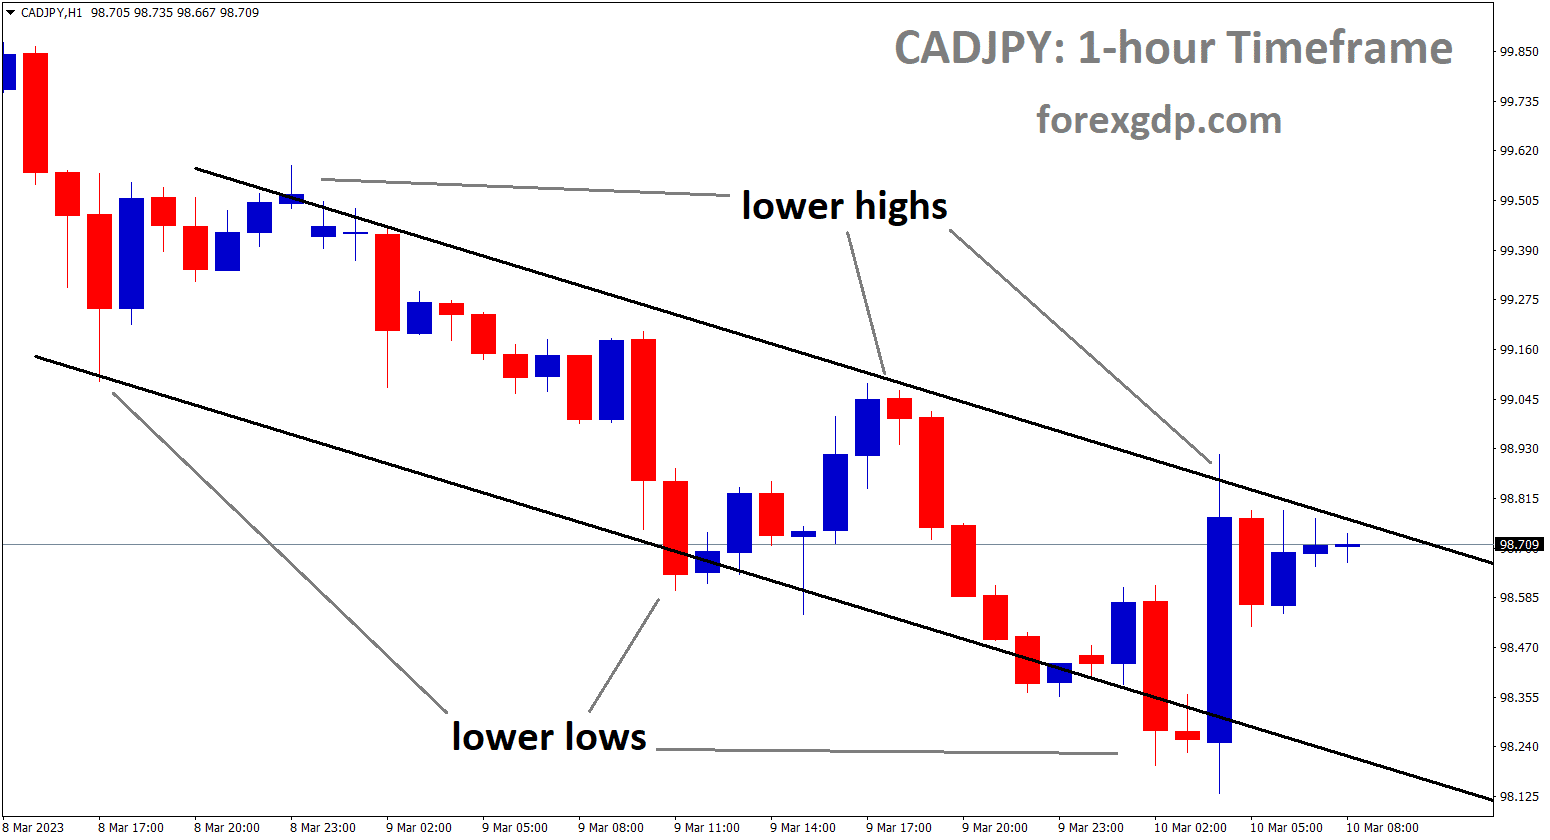 CADJPY is moving in descending channel and the market has reached the lower high area of the channel.